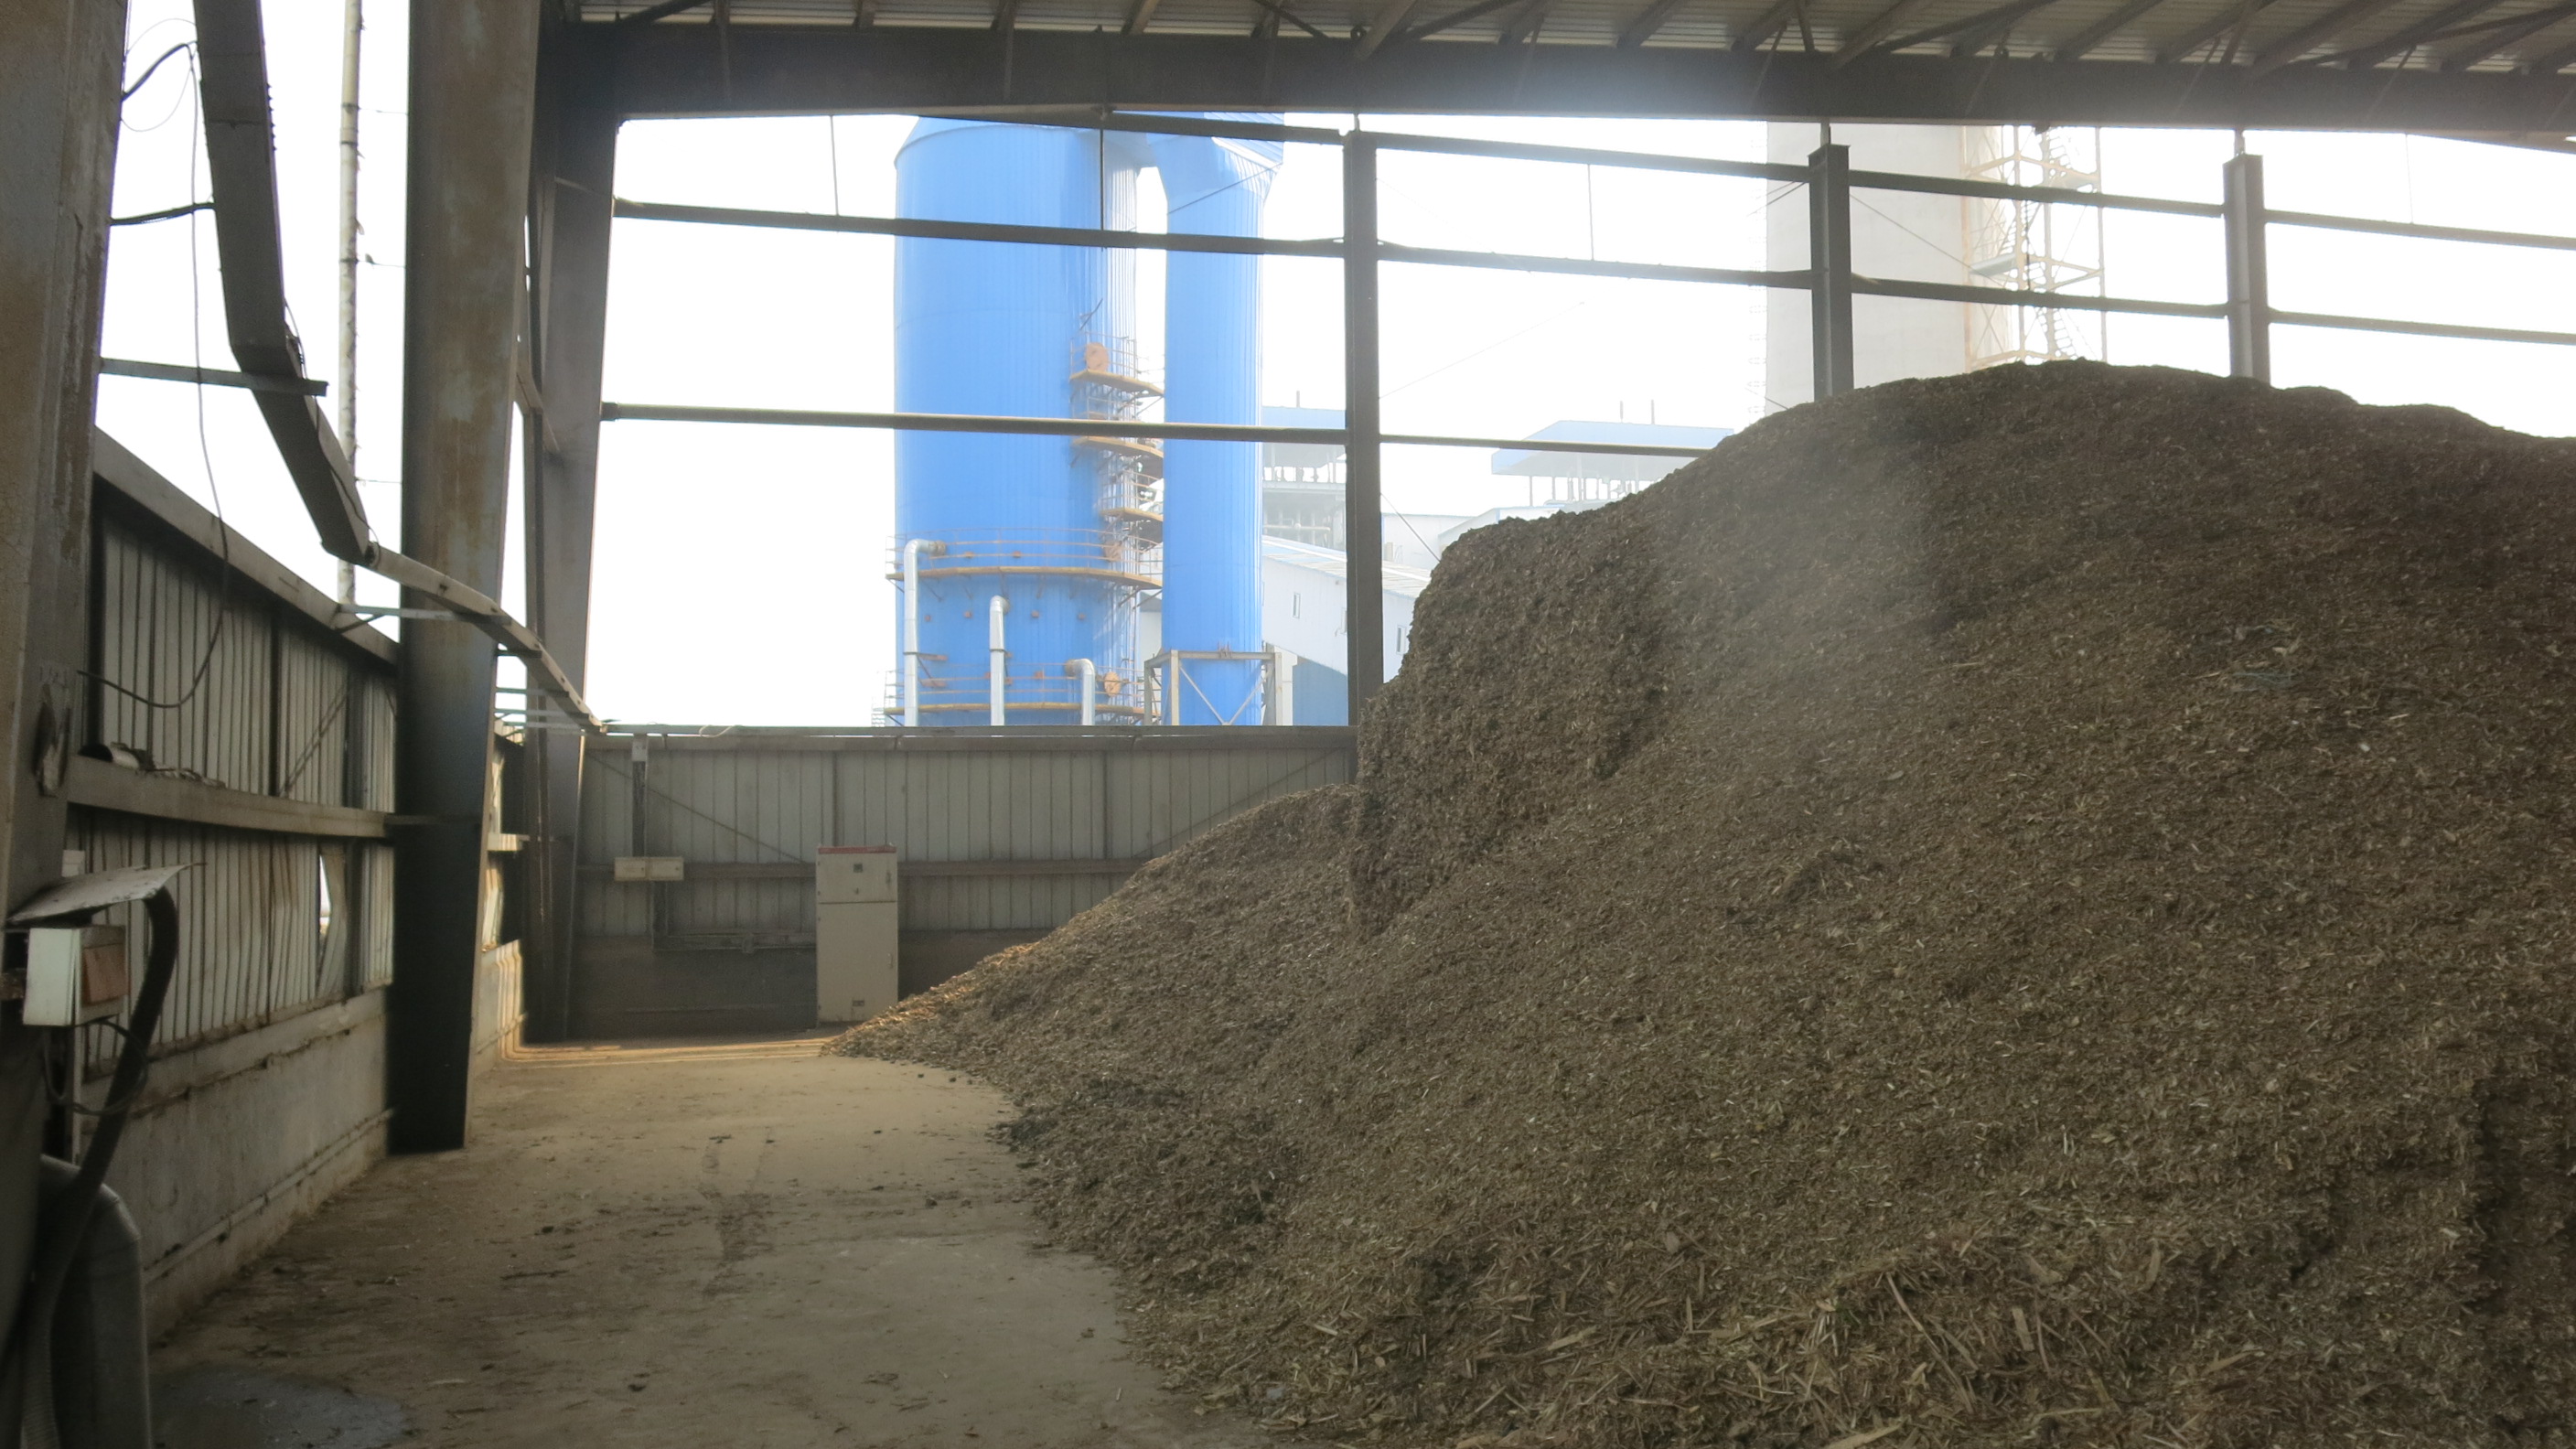 Tons of bio-waste to be transformed into energy in the turbo-generator in the background, at the Shanxi Xinshitai Green Energy power plant. [Photo by Chris Georgiou / China.org.cn]